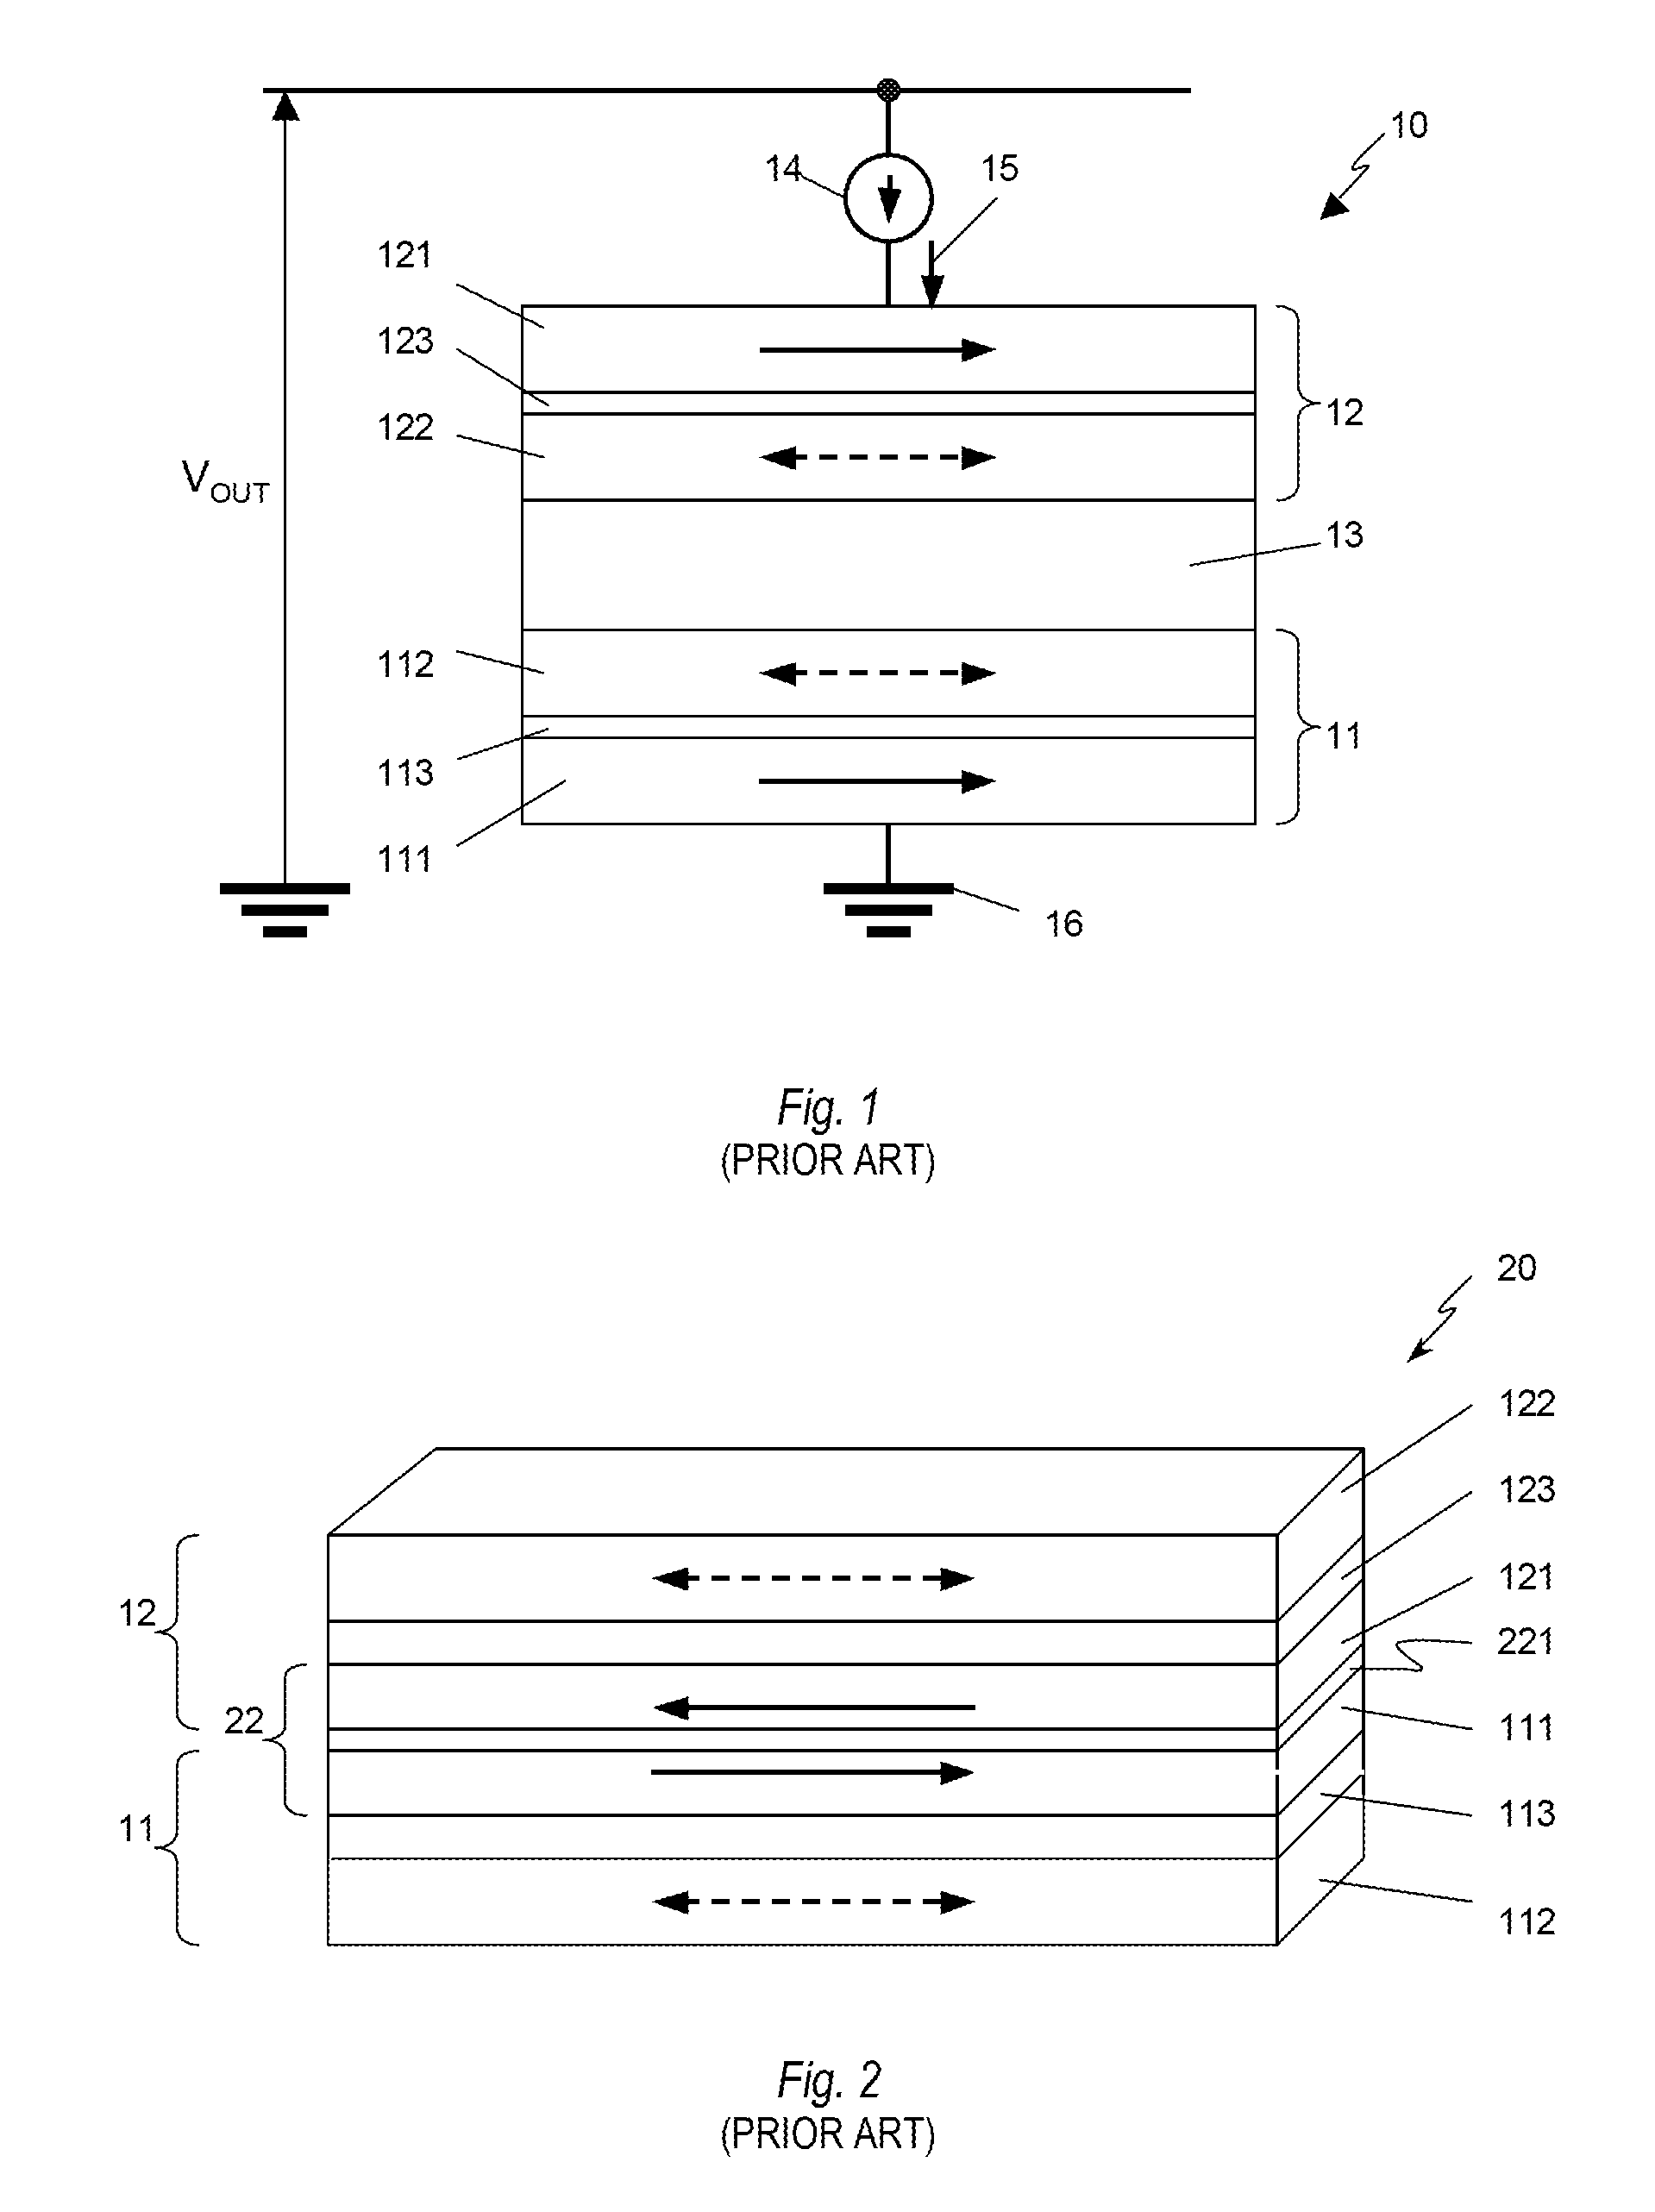 Multibit cell of magnetic random access memory with perpendicular magnetization